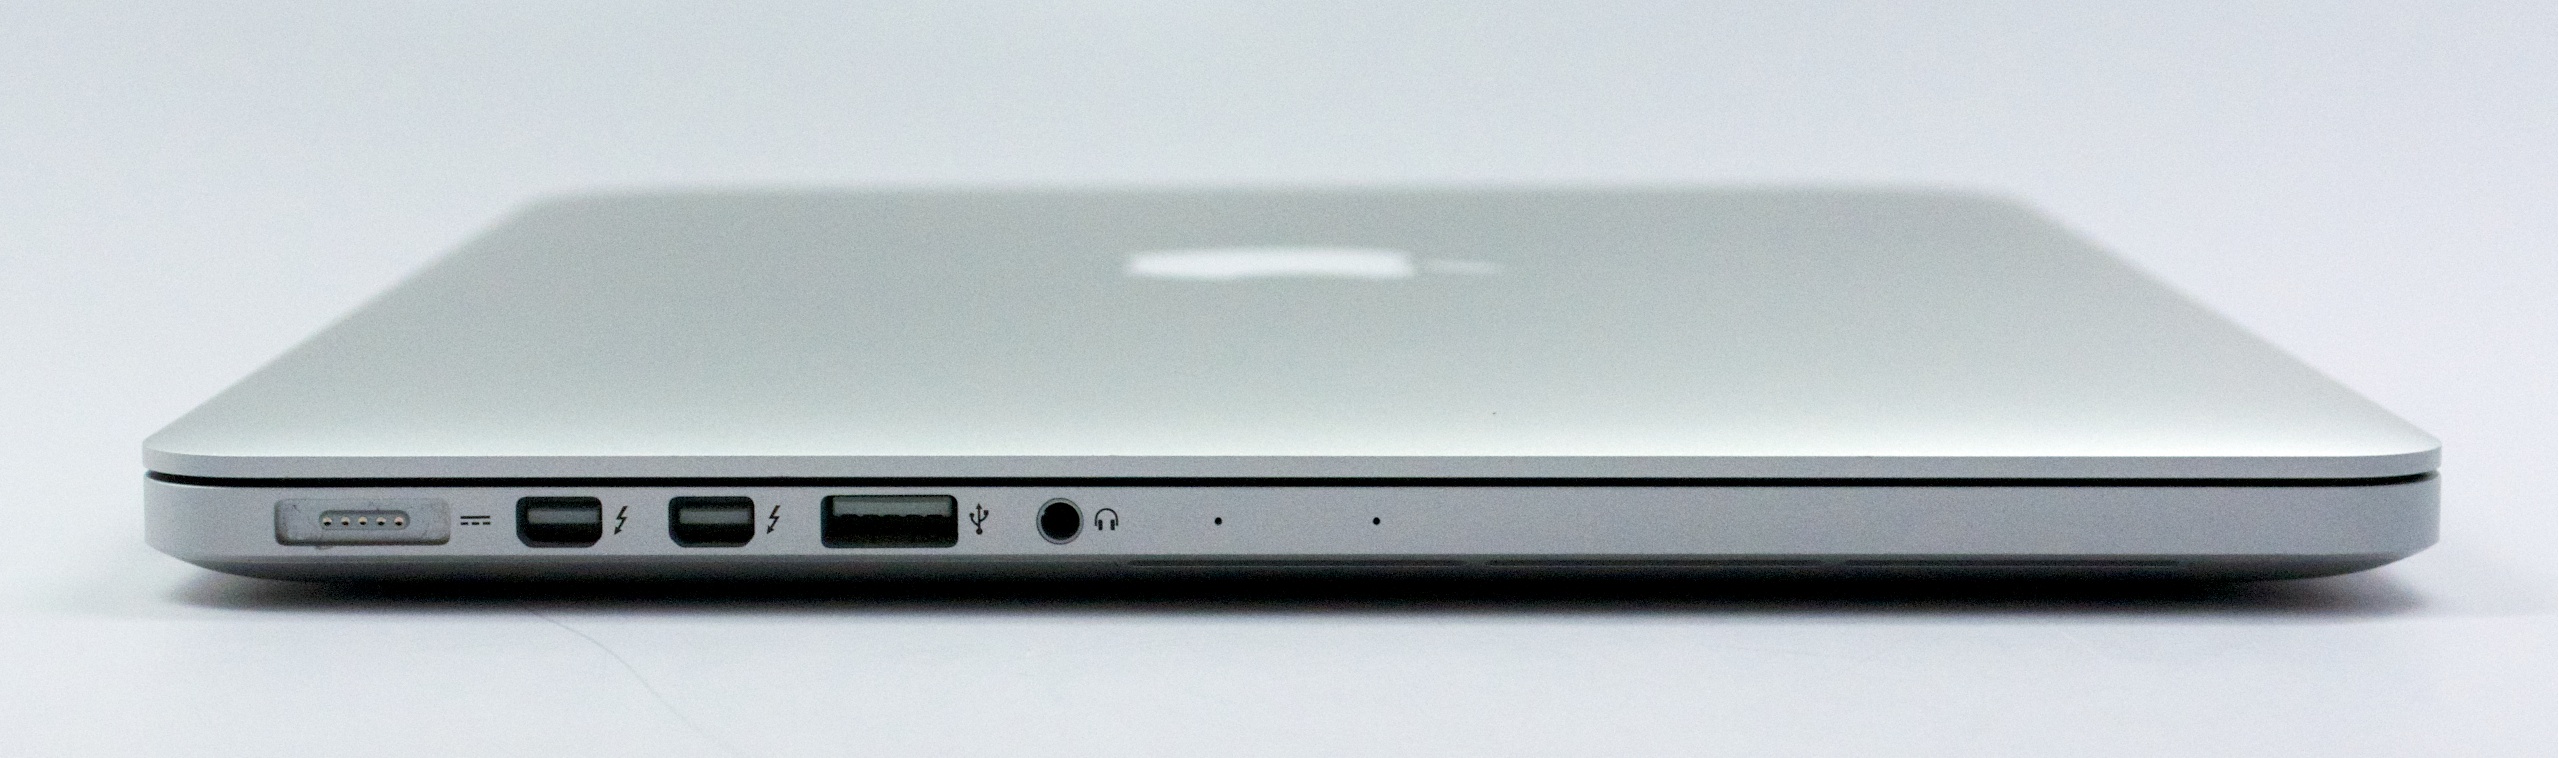 The Macbook Pro 13-inch 2015 - Compare laptops and find laptop reviews